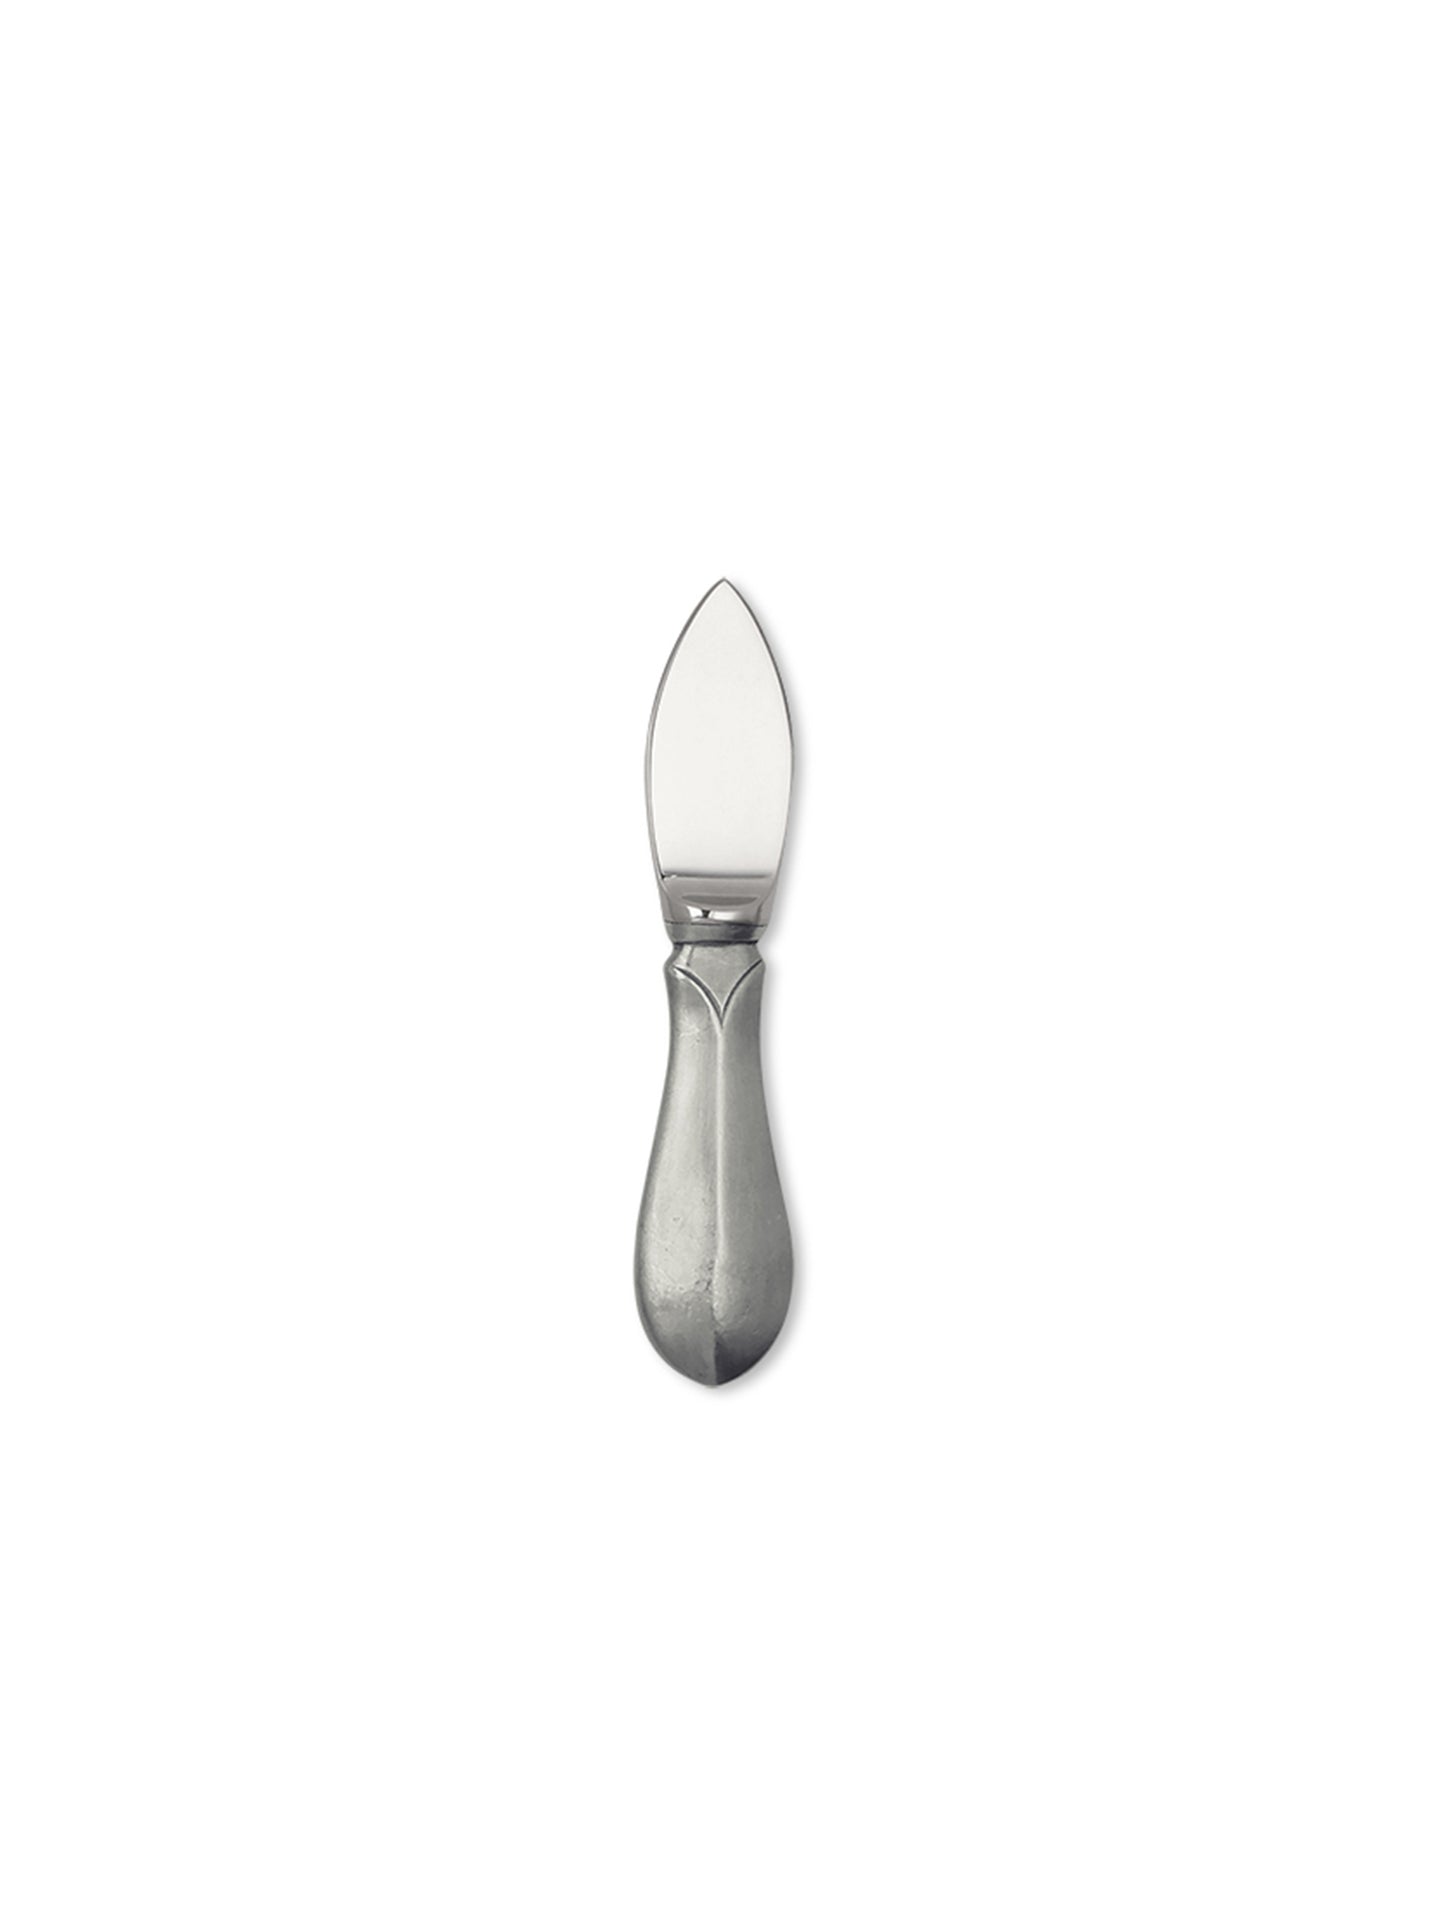 MATCH Pewter Sofia Parmesan Cheese Knife Weston Table